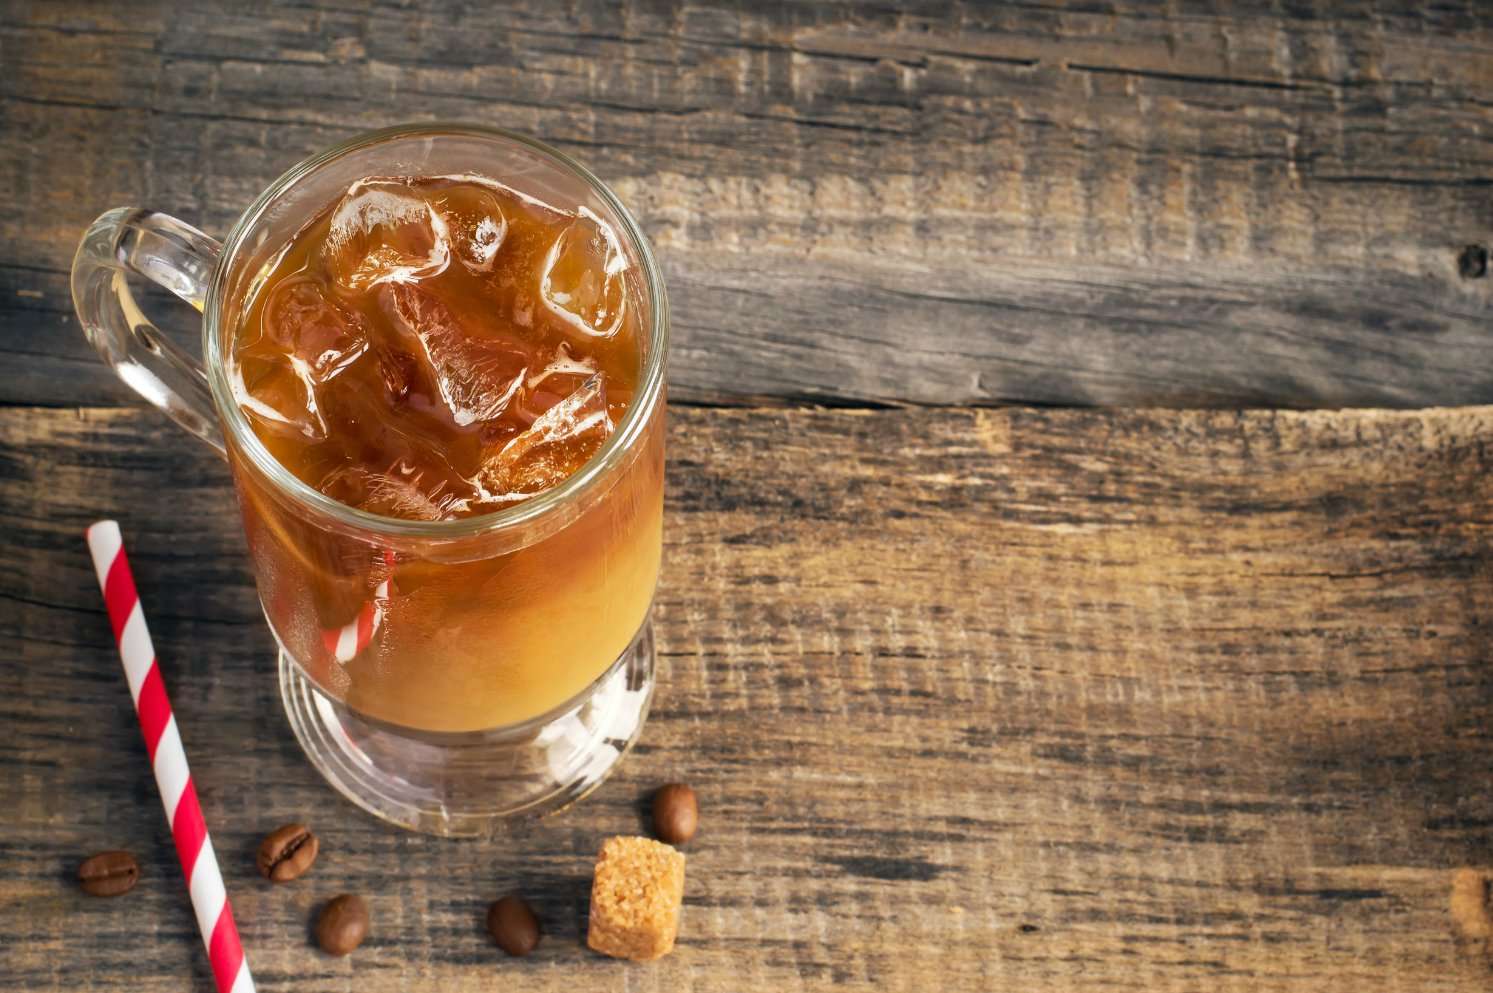 The Easy Way to Make Cold Brew Coffee at Home